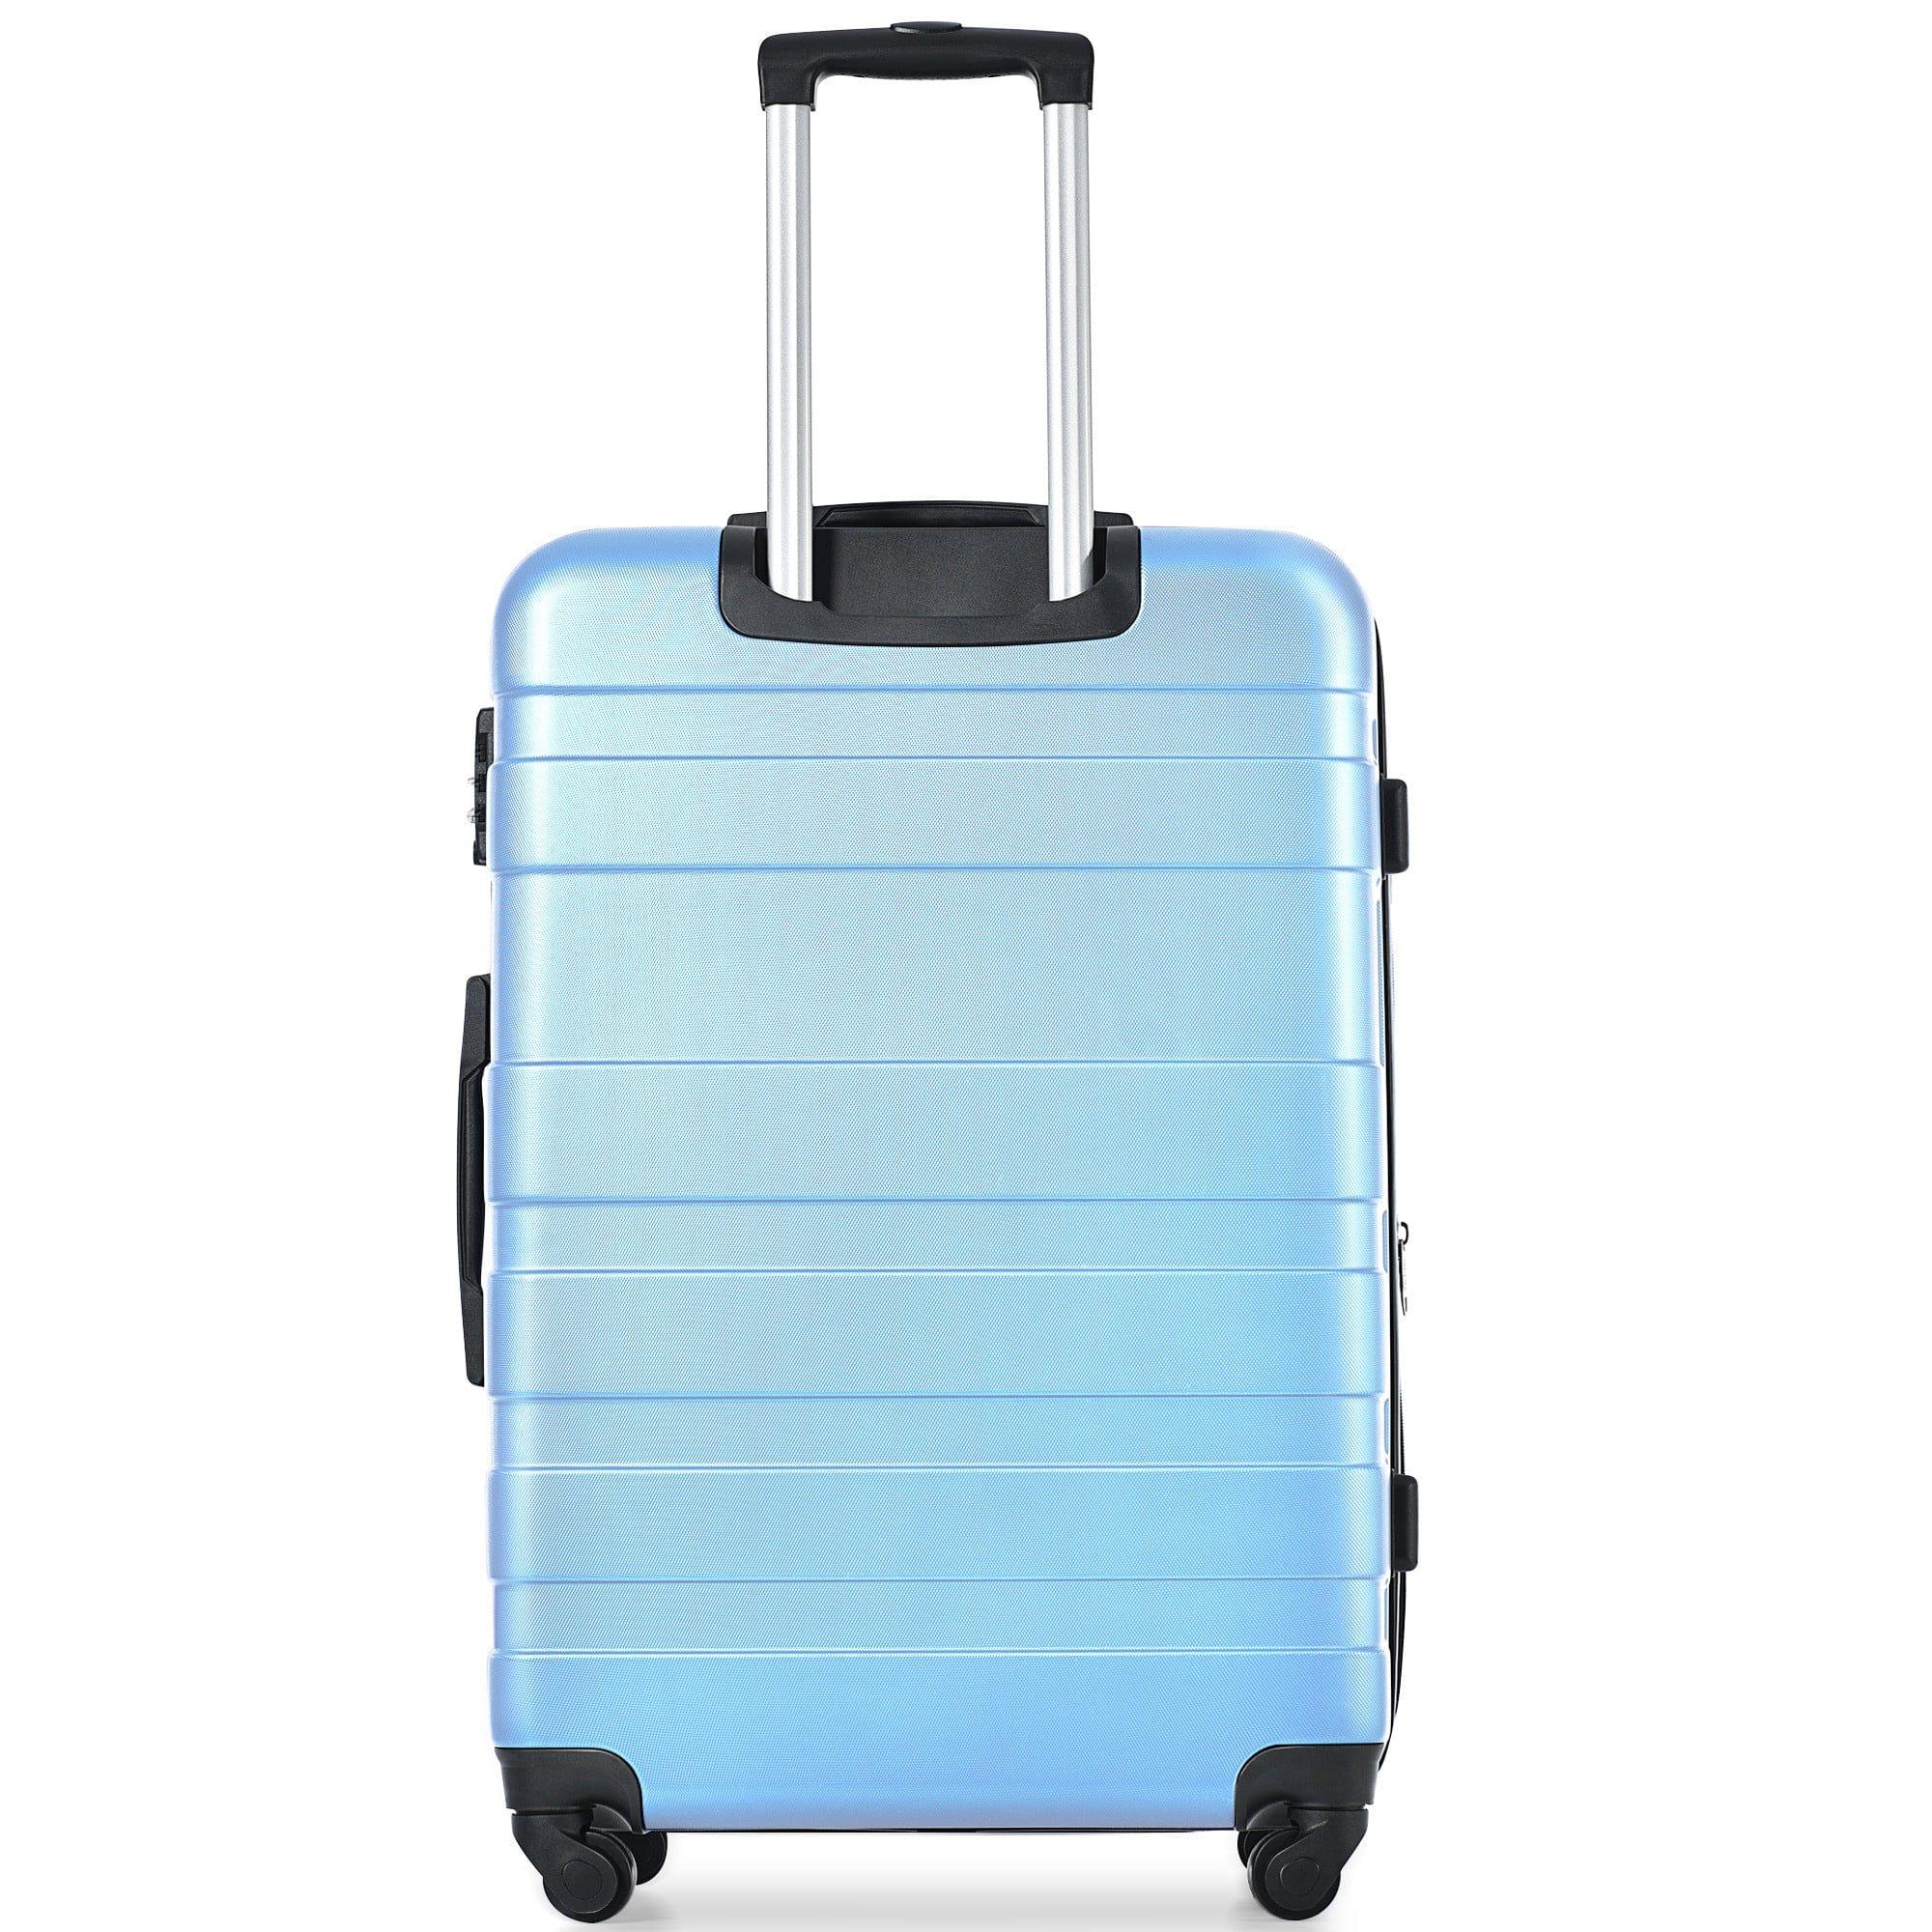 Shop Luggage Sets New Model Expandable ABS Hardshell 3pcs Clearance Luggage Hardside Lightweight Durable Suitcase sets Spinner Wheels Suitcase with TSA Lock 20''24''28''(Sky Blue) Mademoiselle Home Decor